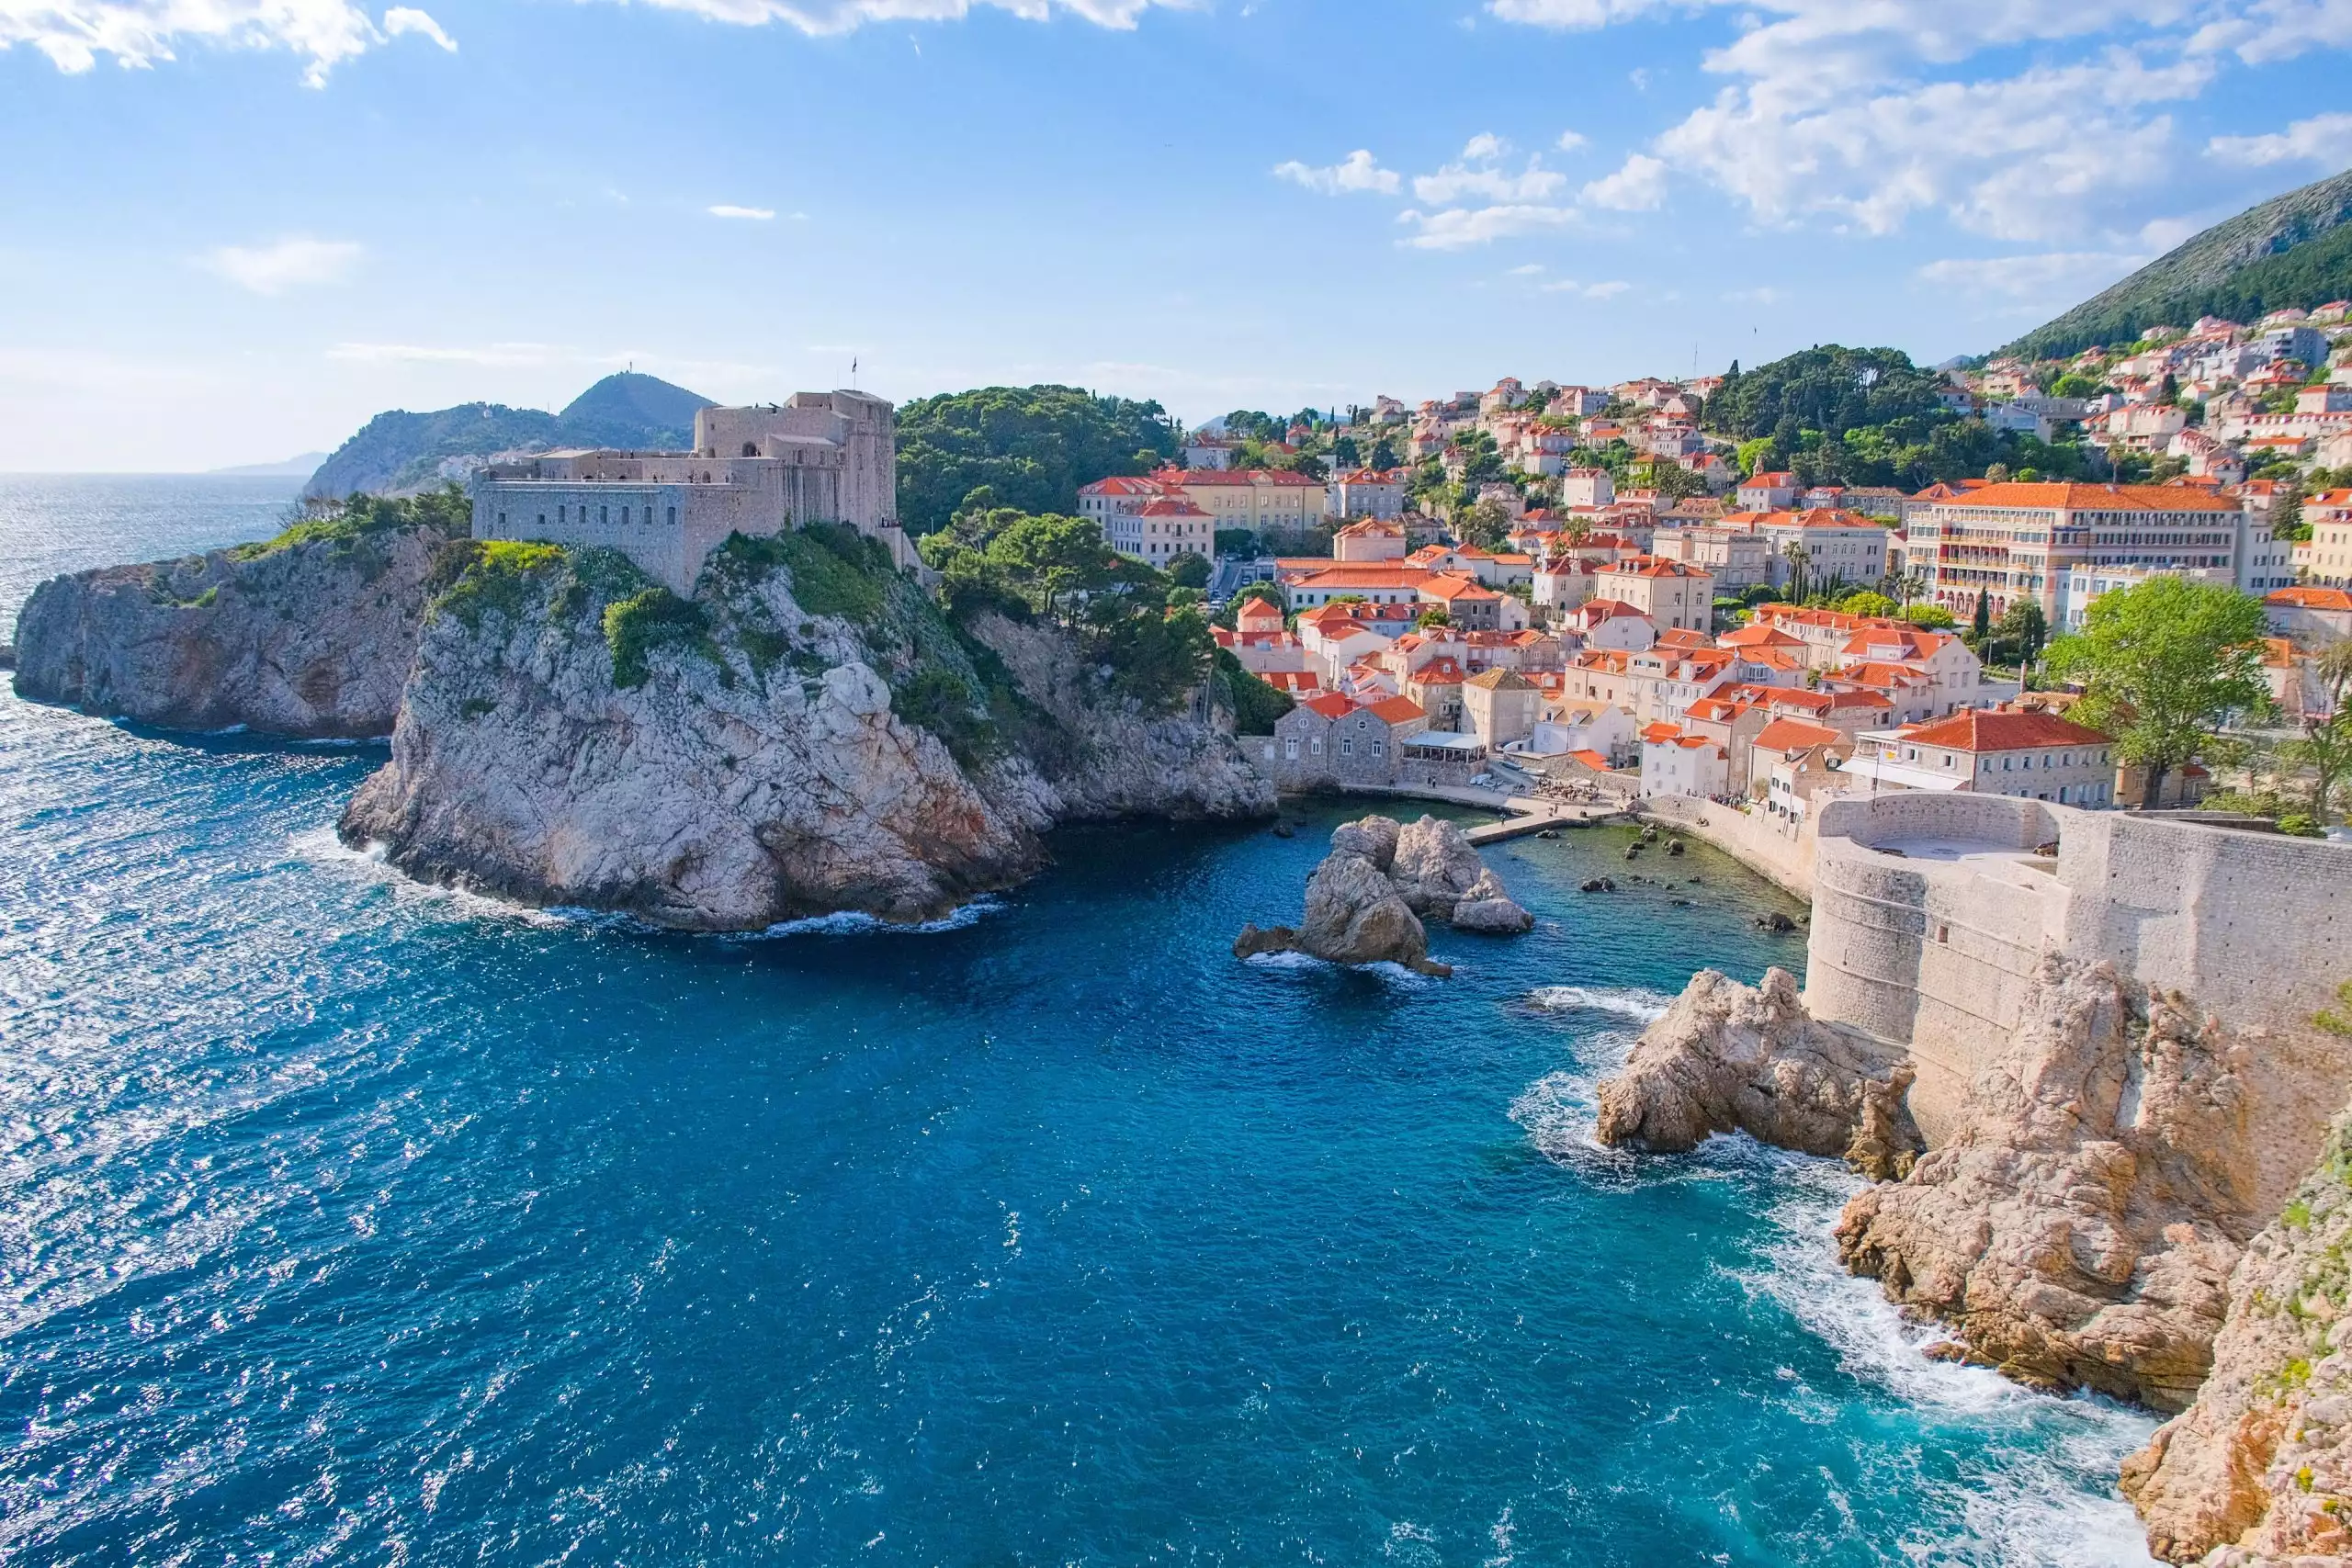 Fully arranged city trip to Dubrovnik